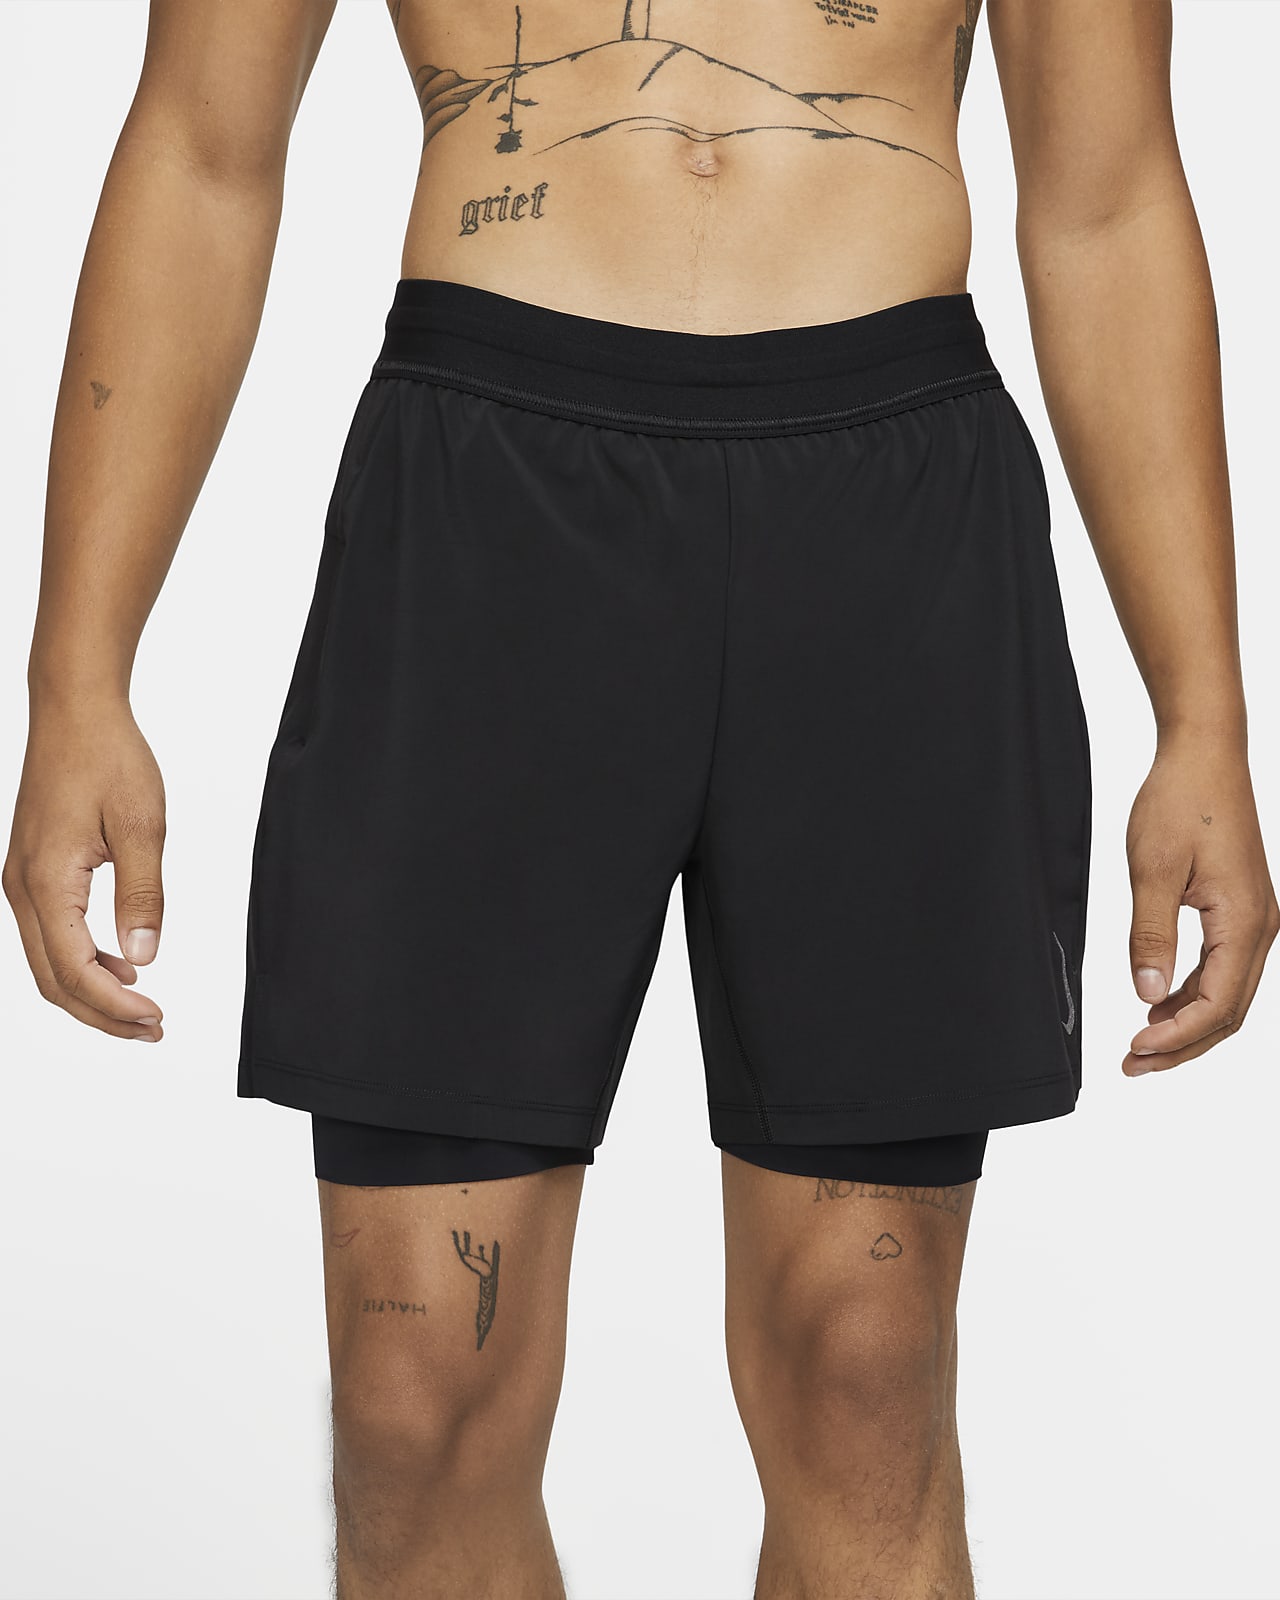 Nike Yoga Artist in Residence printed woven shorts in green